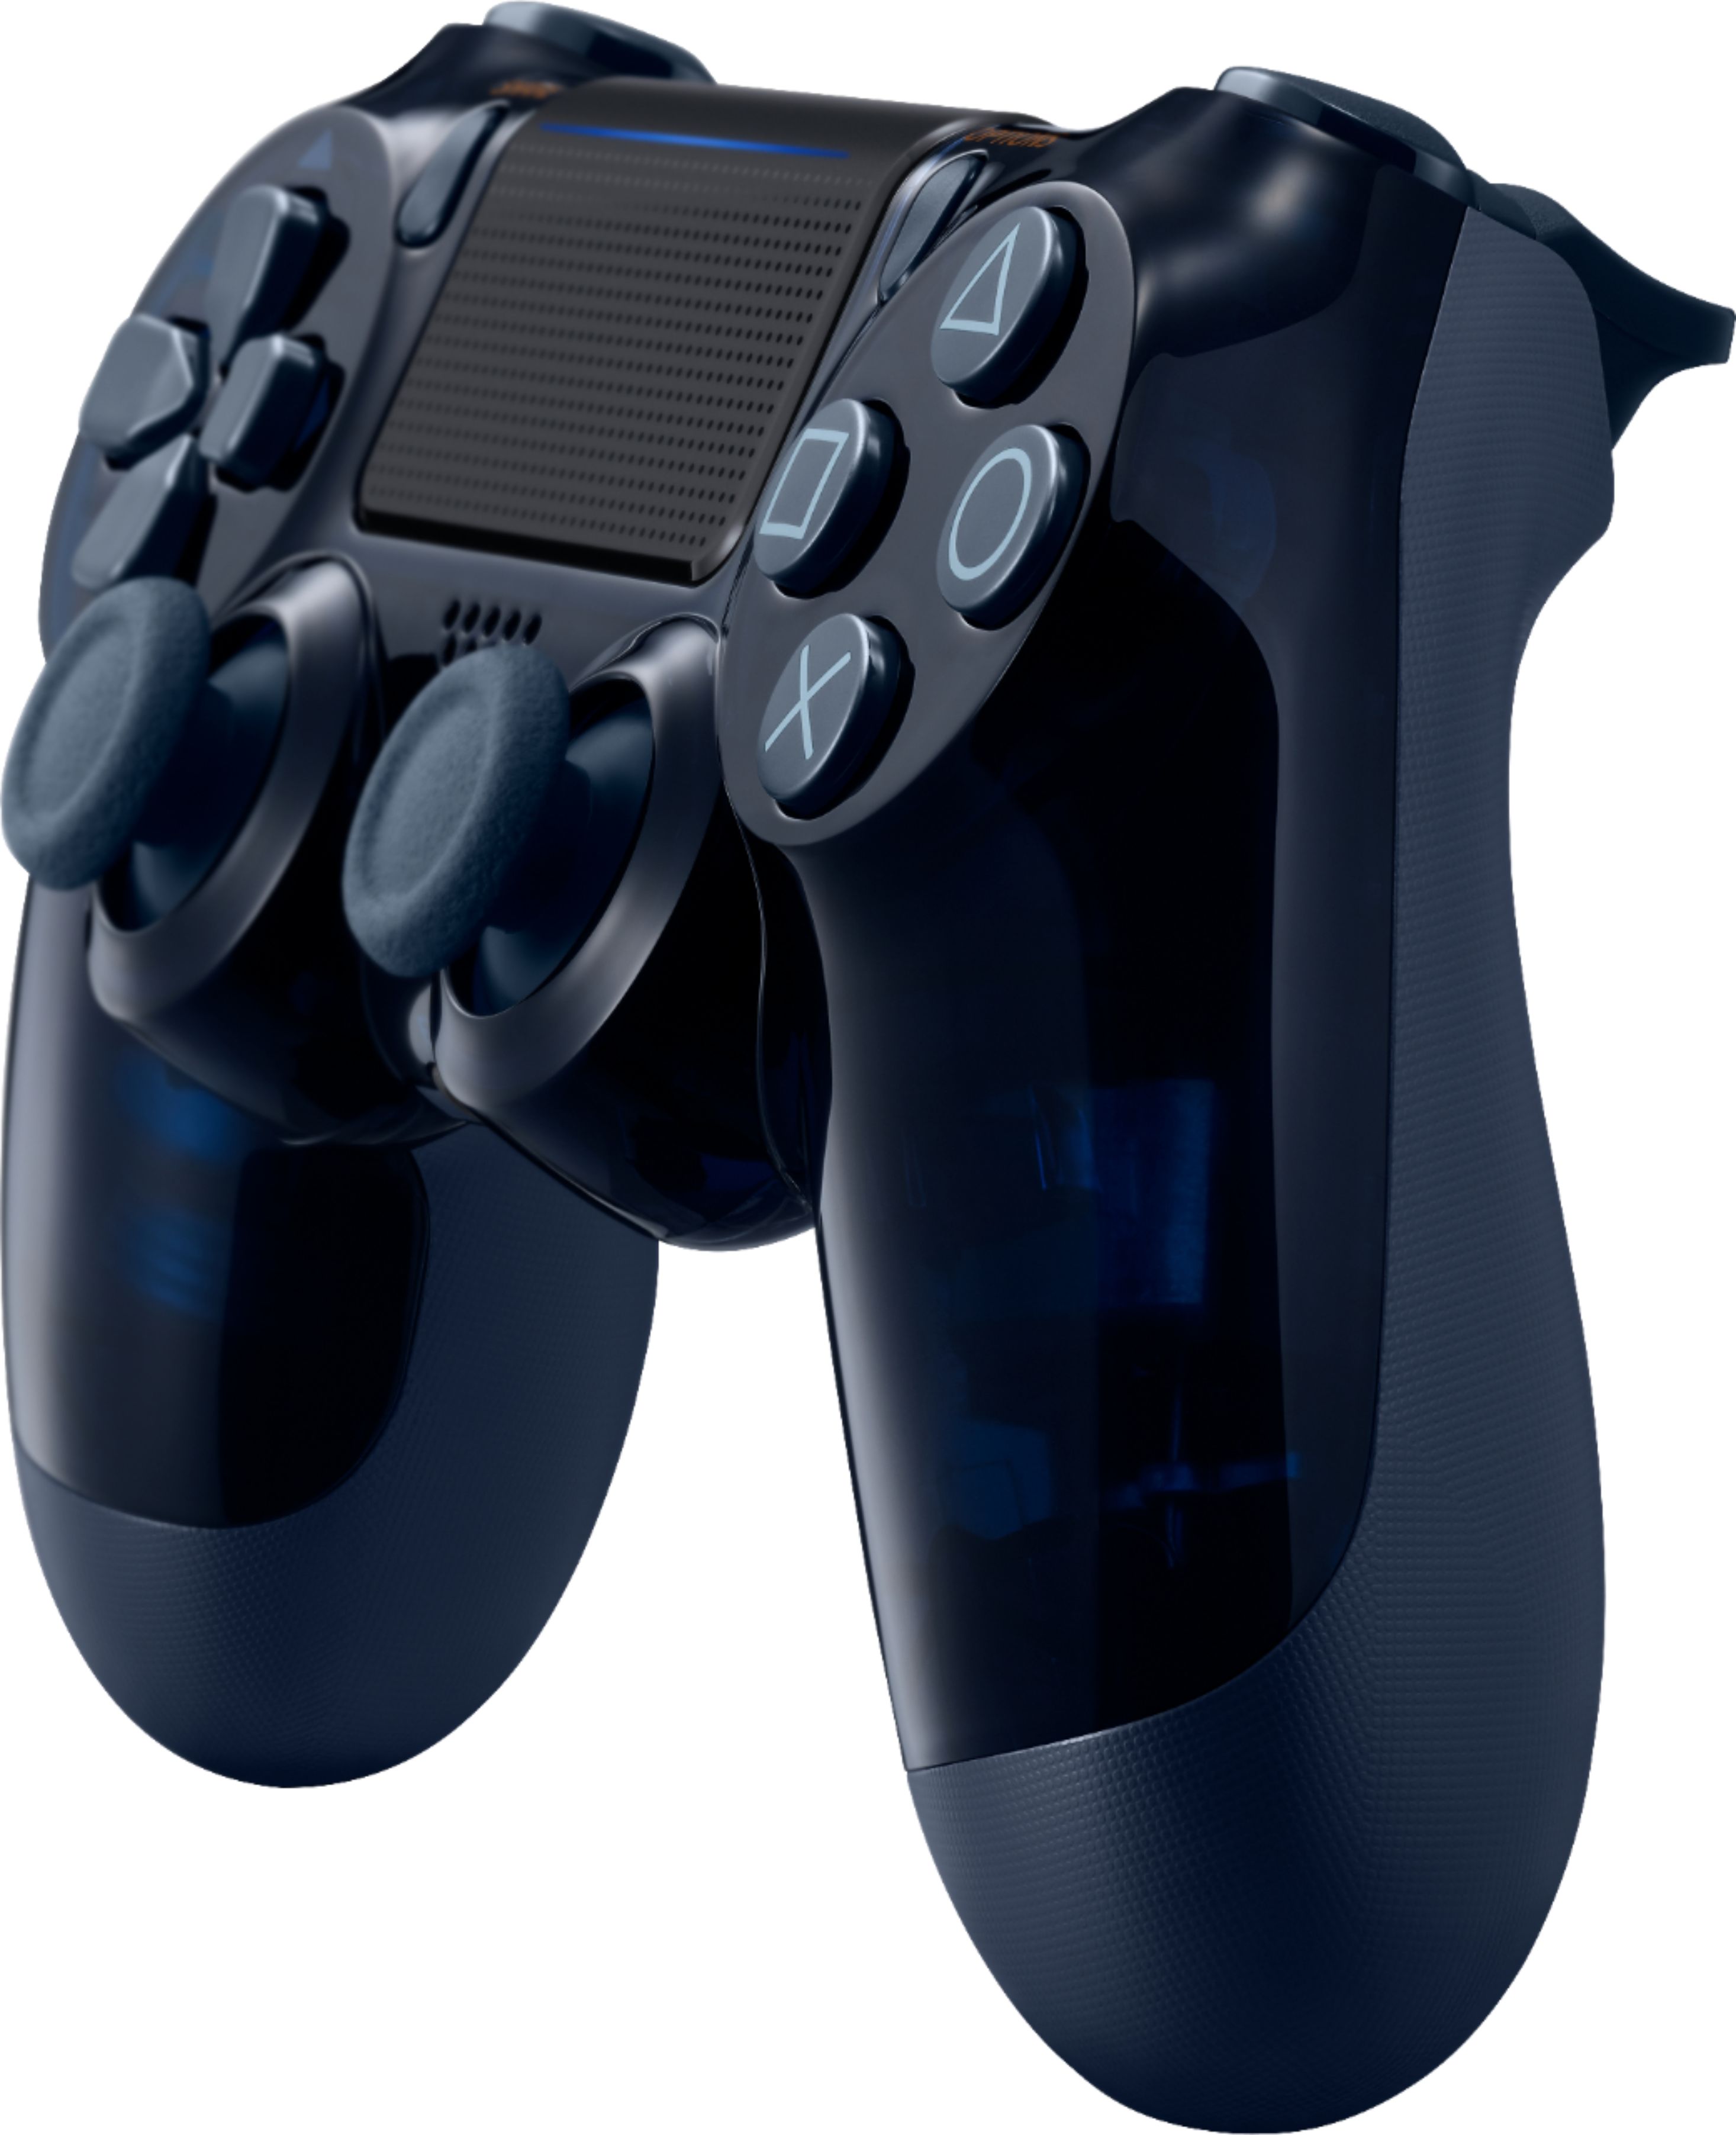 limited edition ps4 controller 500 million